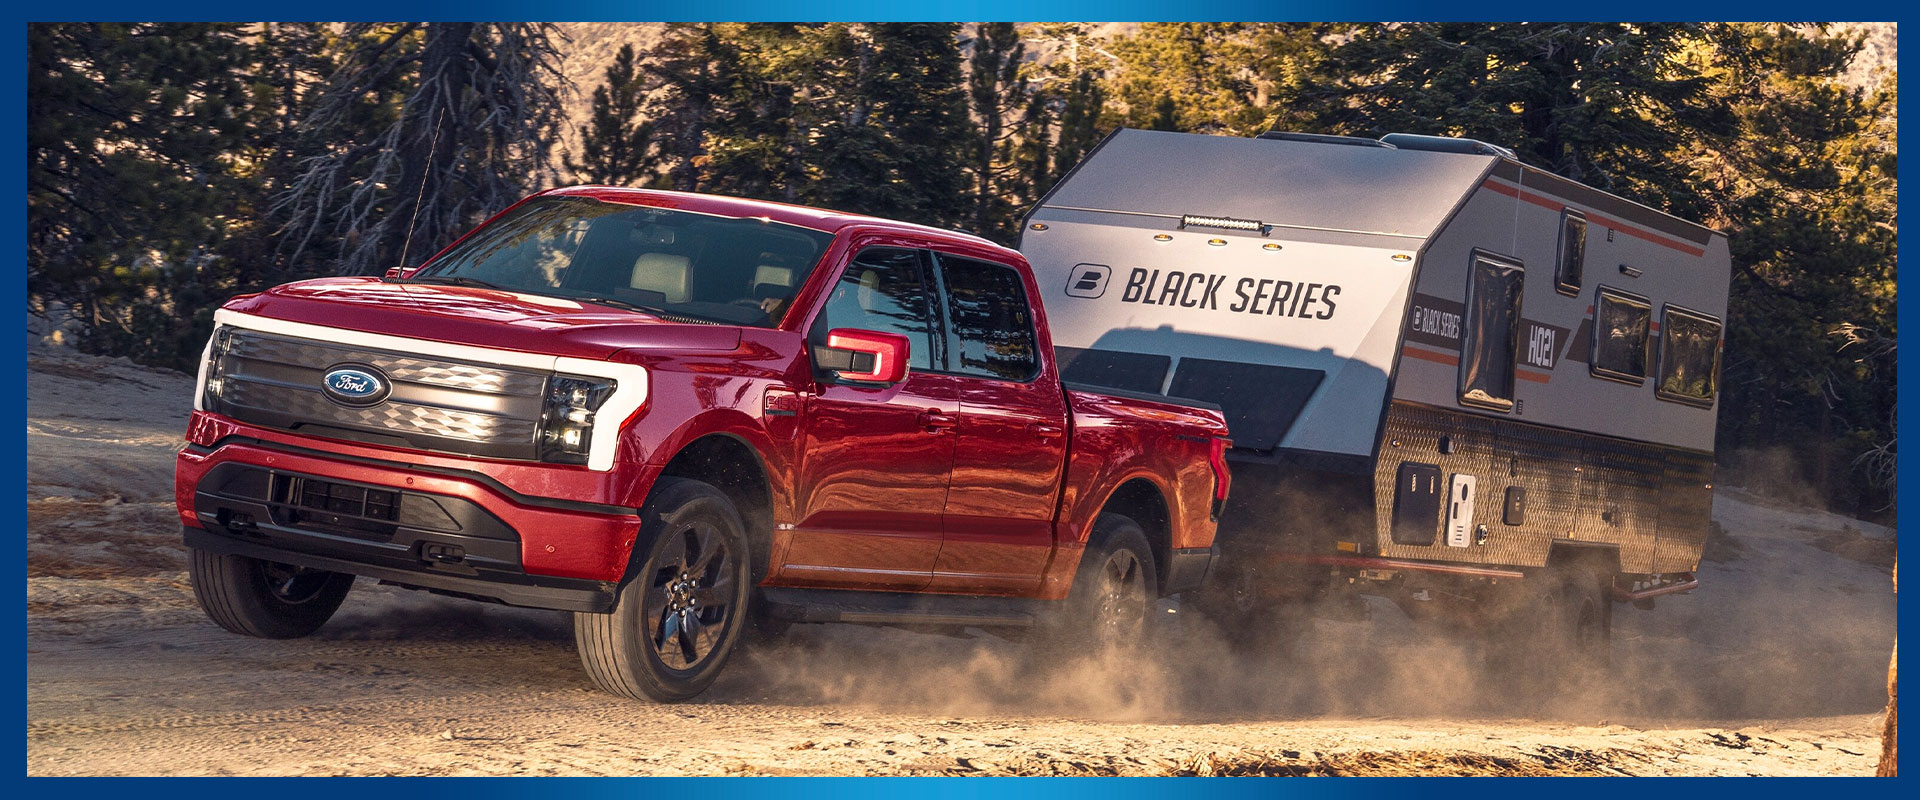 Motortrend Truck of the Year